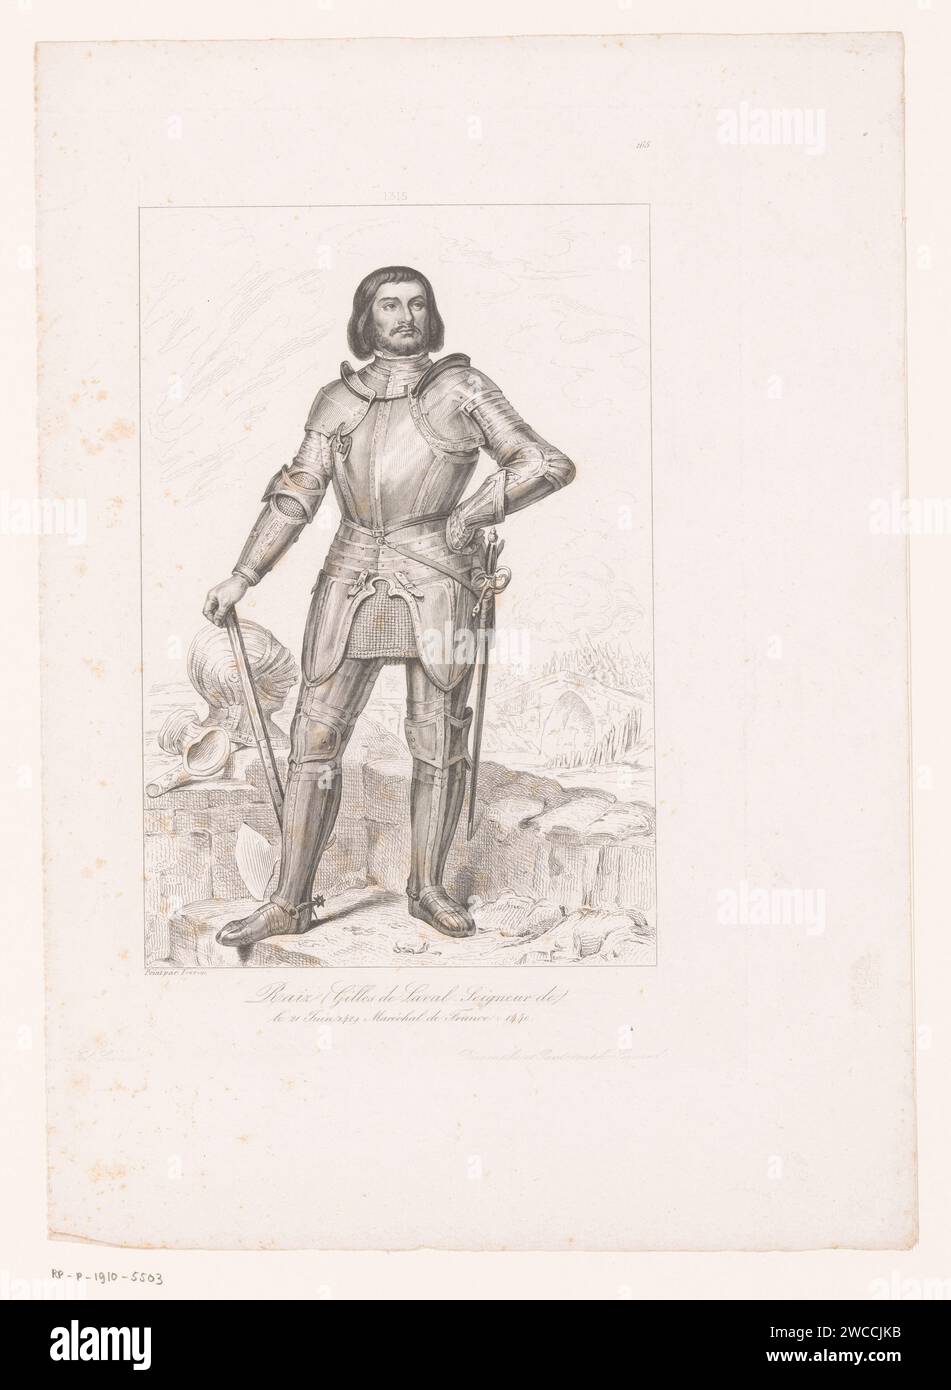 Portret Van Gilles de Rais, Nicolas Edouard Lerouge, After Ferran, 1838 - 1841 print Numbered in the middle: 1315. Paris paper etching historical persons. feudal lord. knight Stock Photo